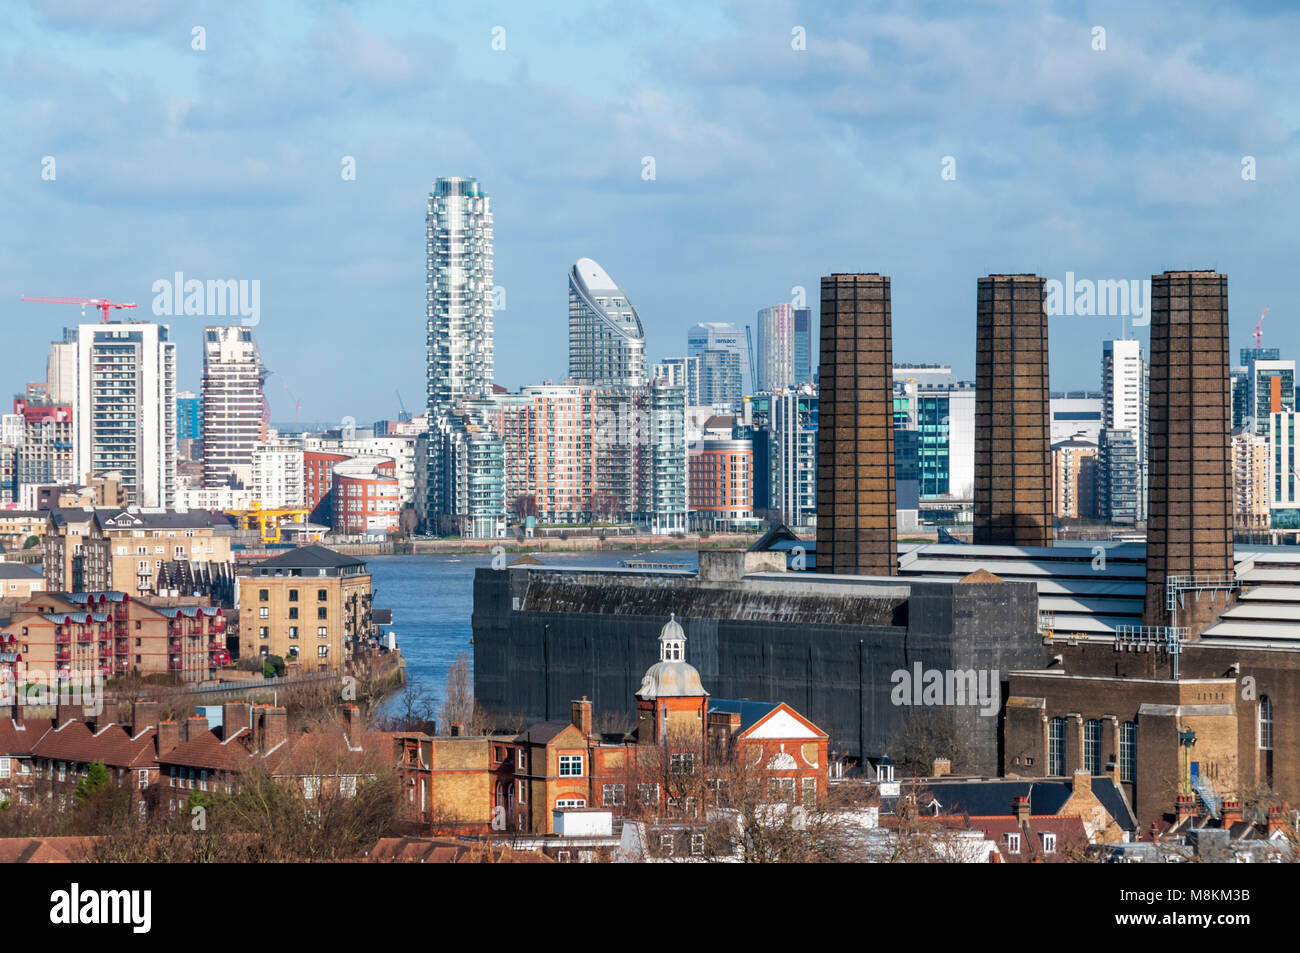 Ontario Tower and Providence Tower in Tower Hamlets.  Seen across the Thames from Greenwich. Stock Photo